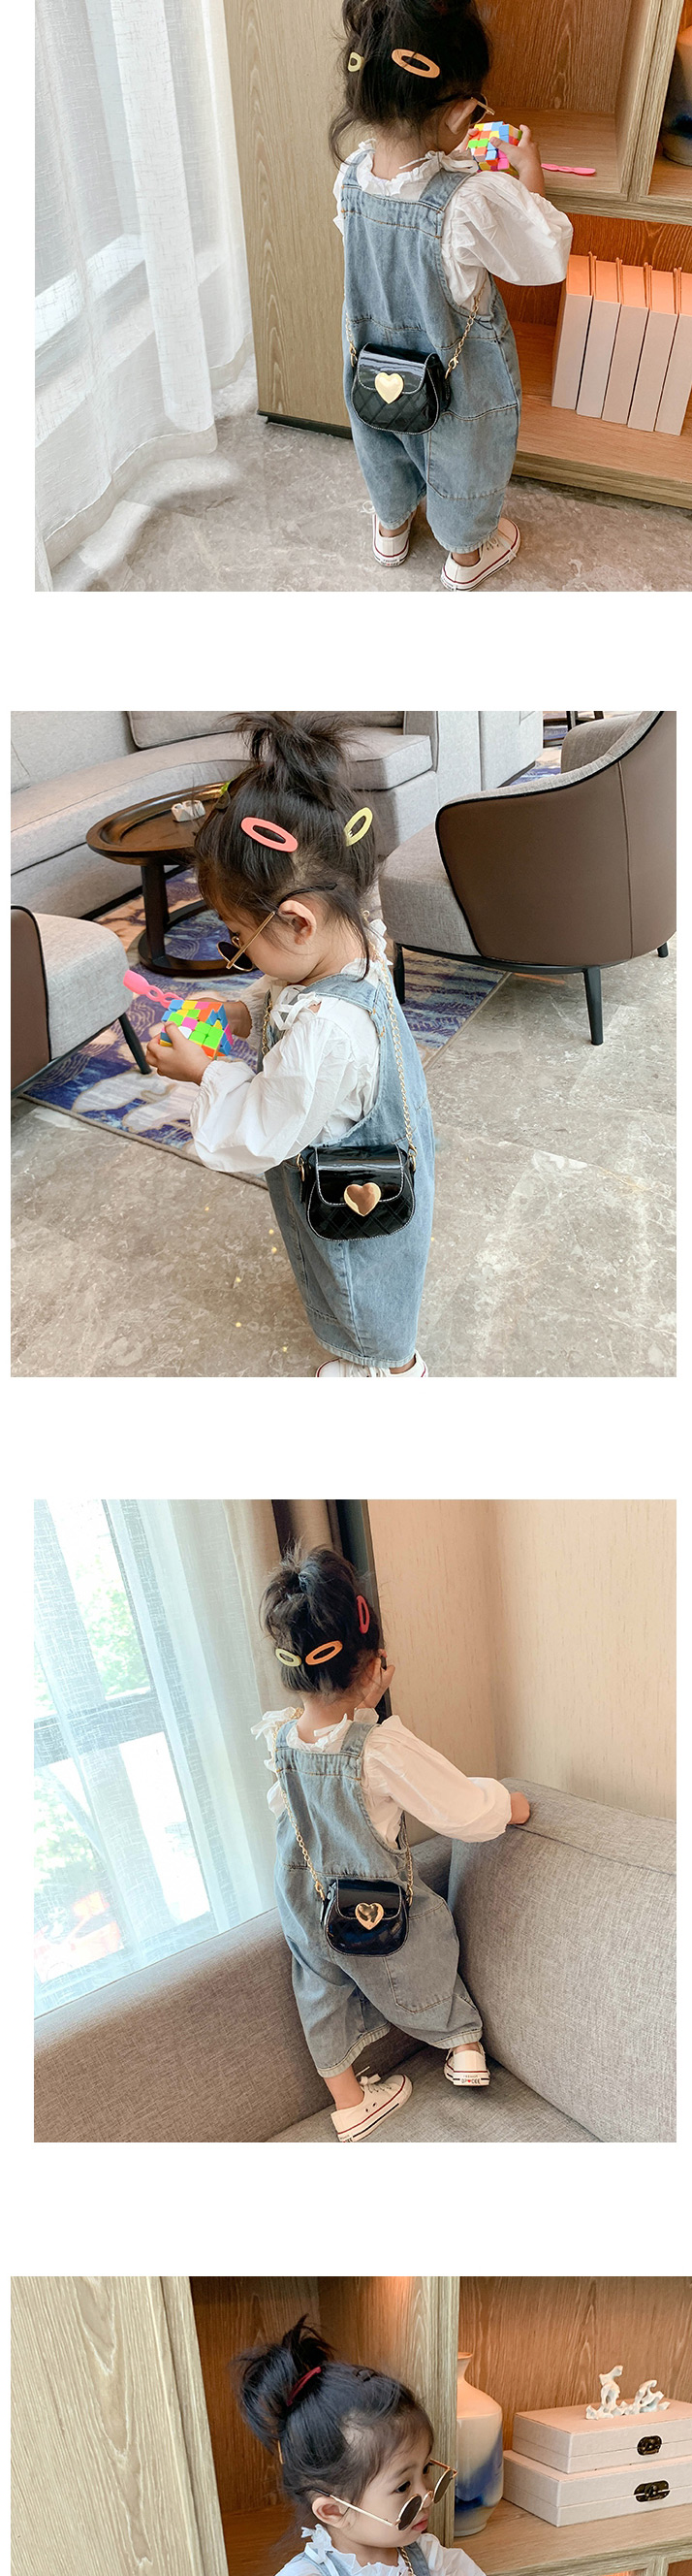 Fashion Yellow Childrens One-shoulder Diagonal Bag With Chain Love Lock,Shoulder bags